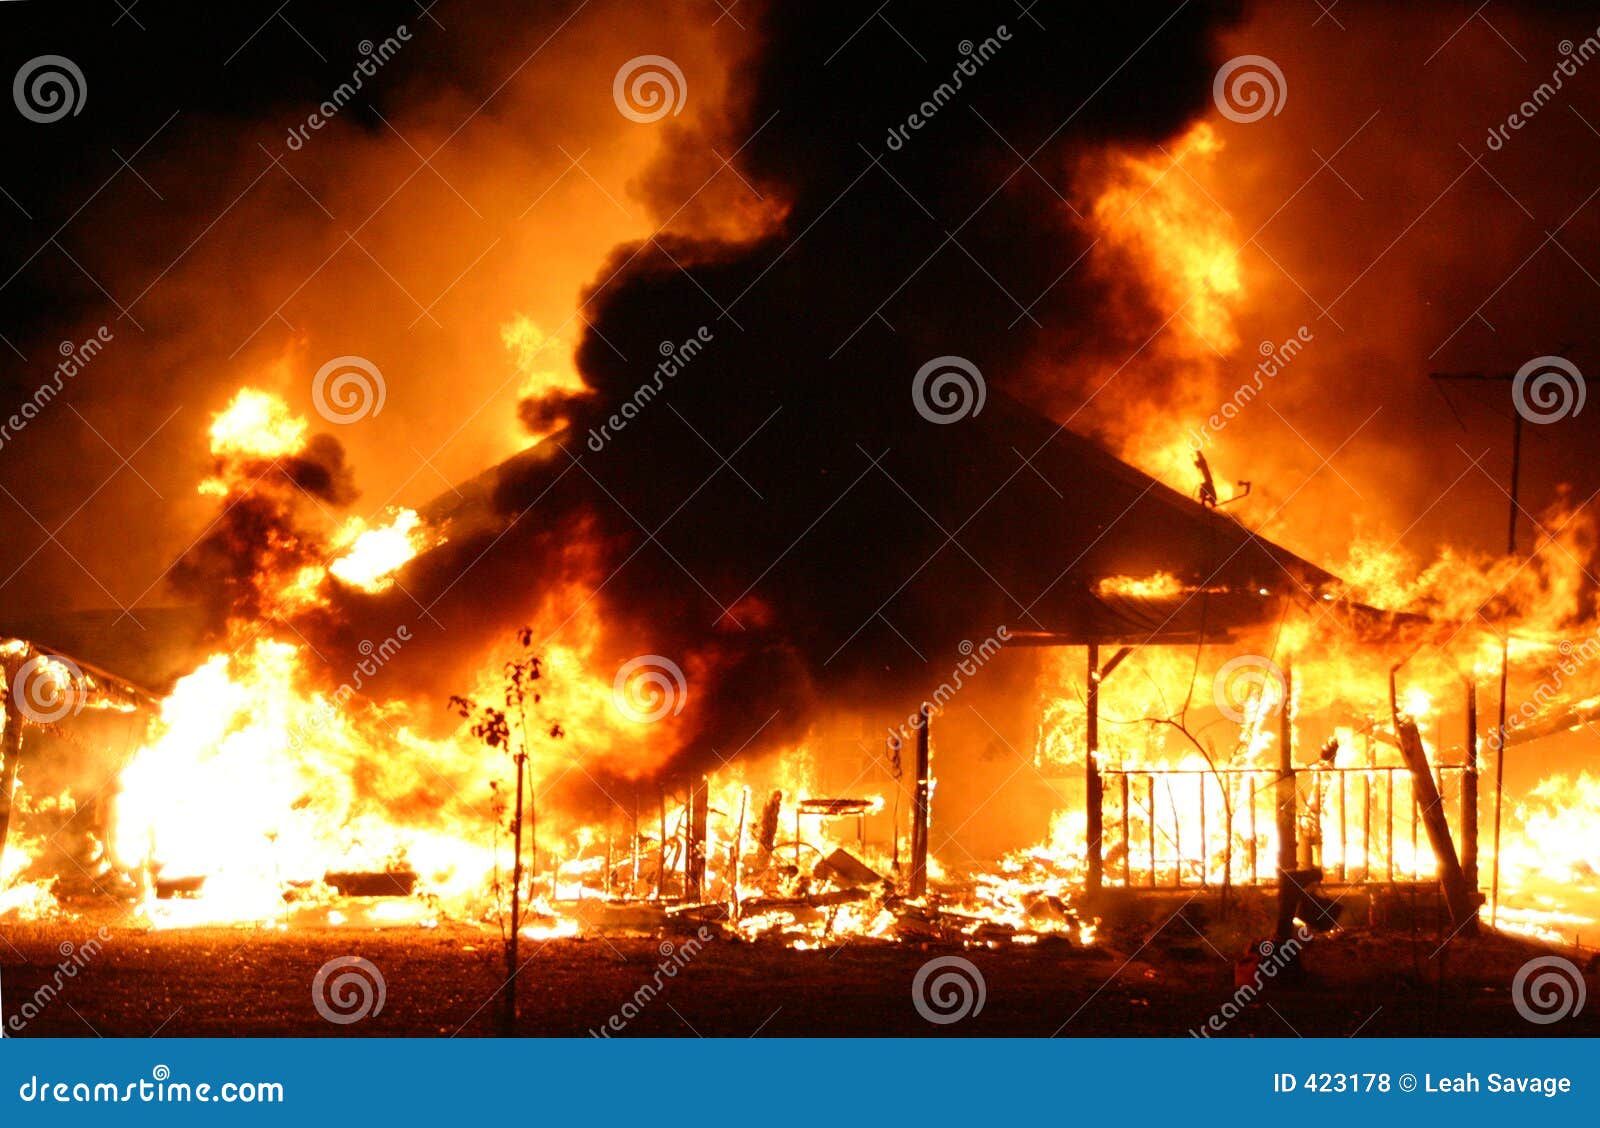 House Fire Royalty Free Stock Photos - Image: 423178